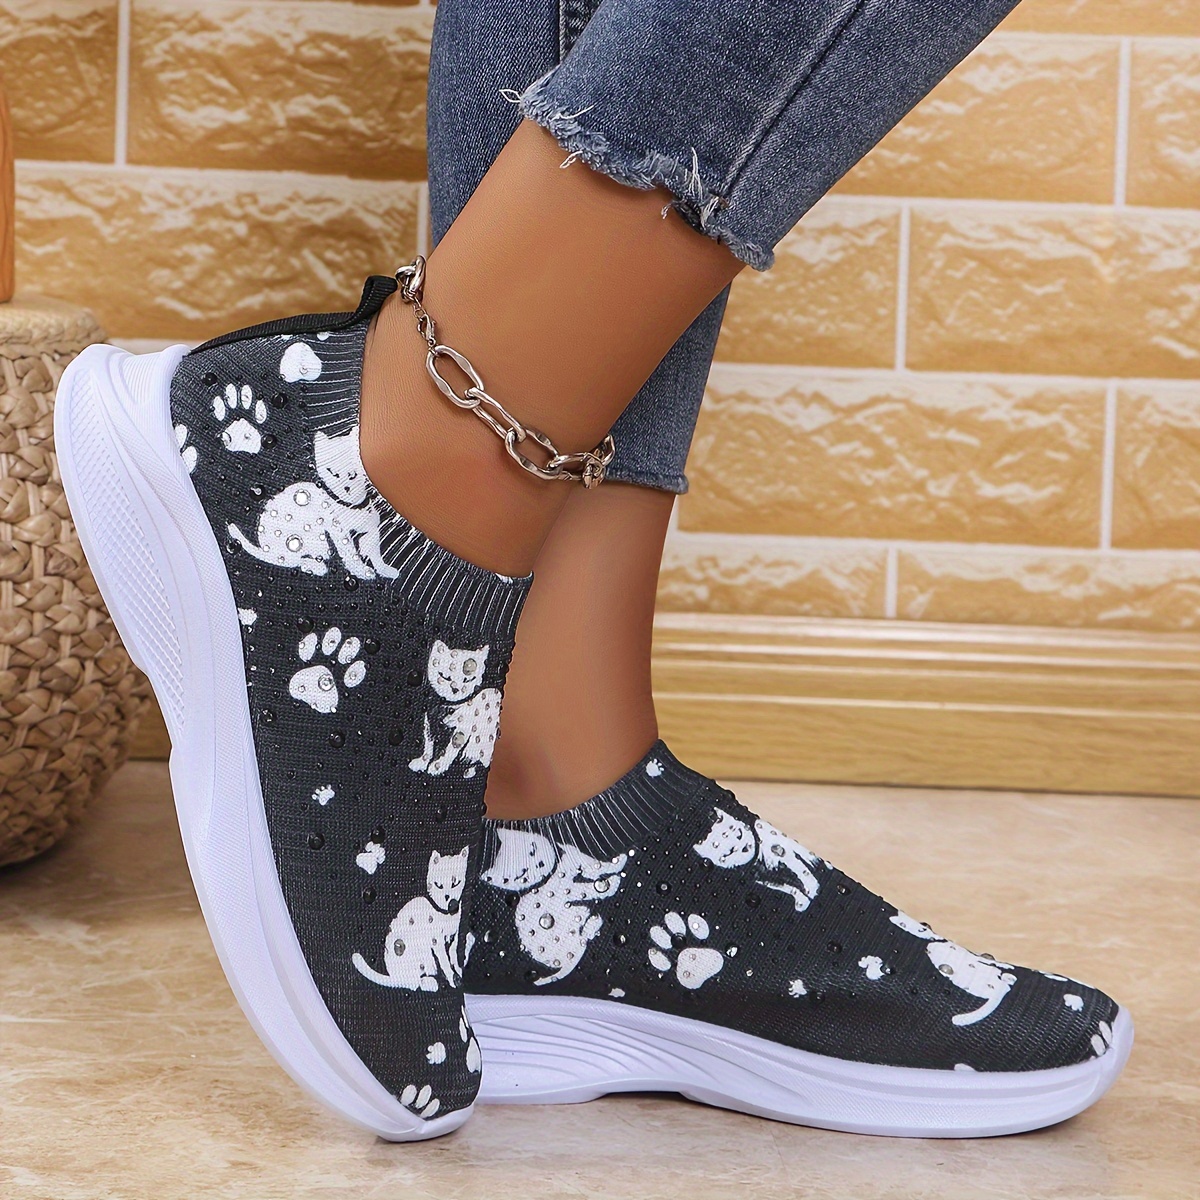 

Breathable Women's Slip-on Sneakers - Vintage Style, Lightweight & Comfortable Casual Shoes With Eva Sole